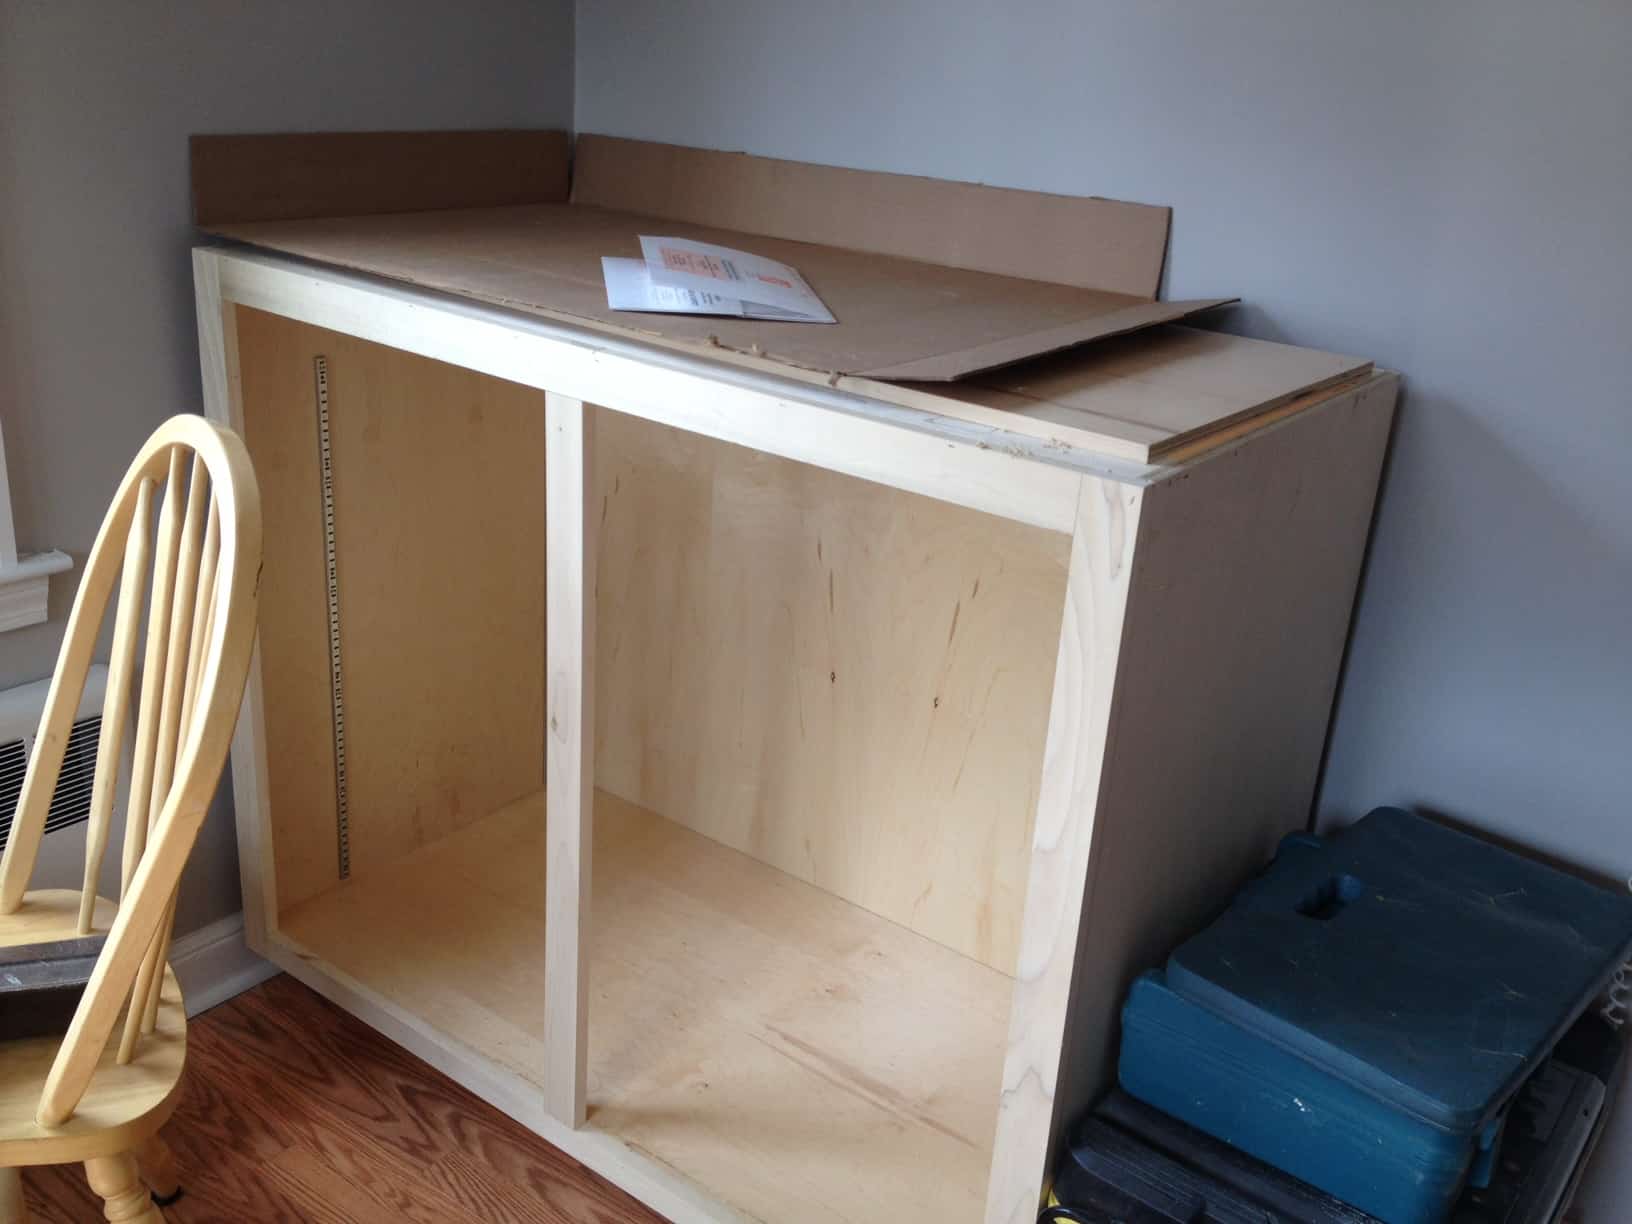 A cabinet, unpainted and unstained, and missing doors